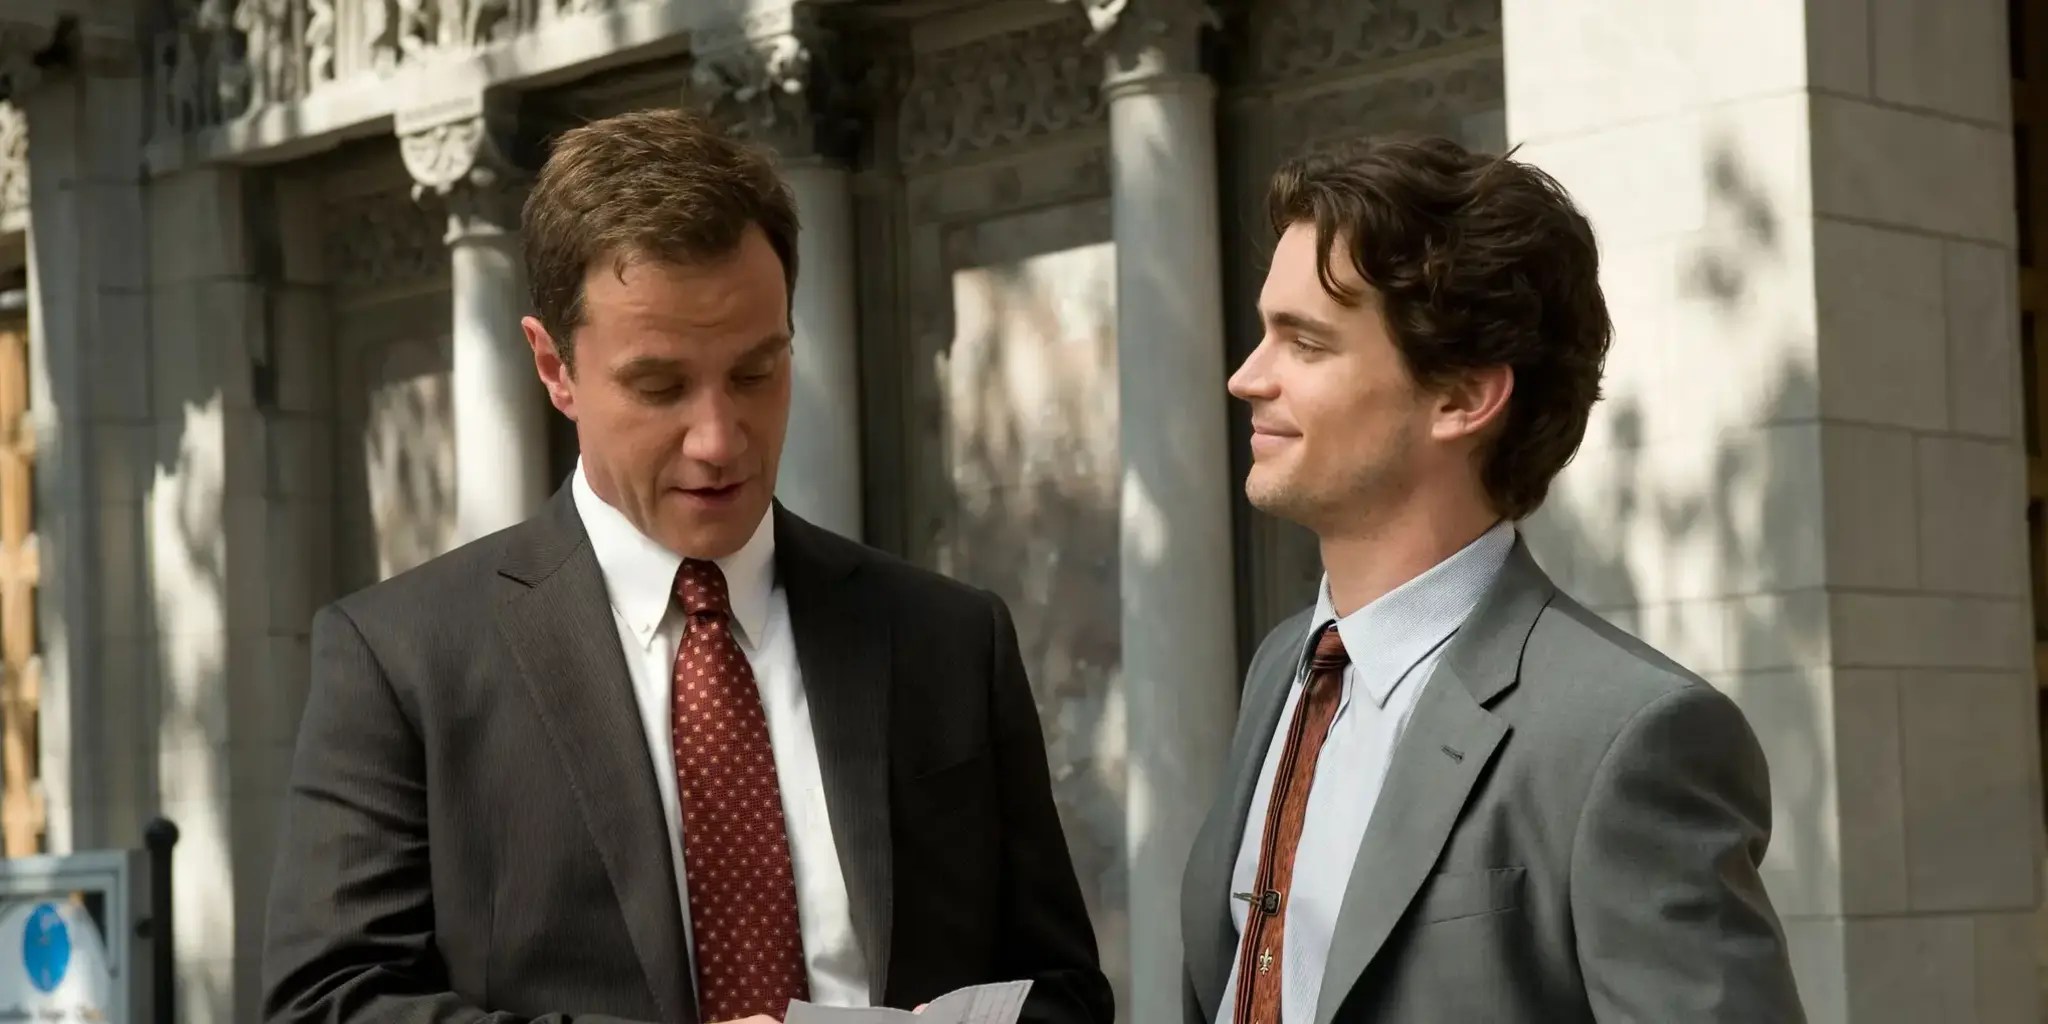 The “Real” in White Collar